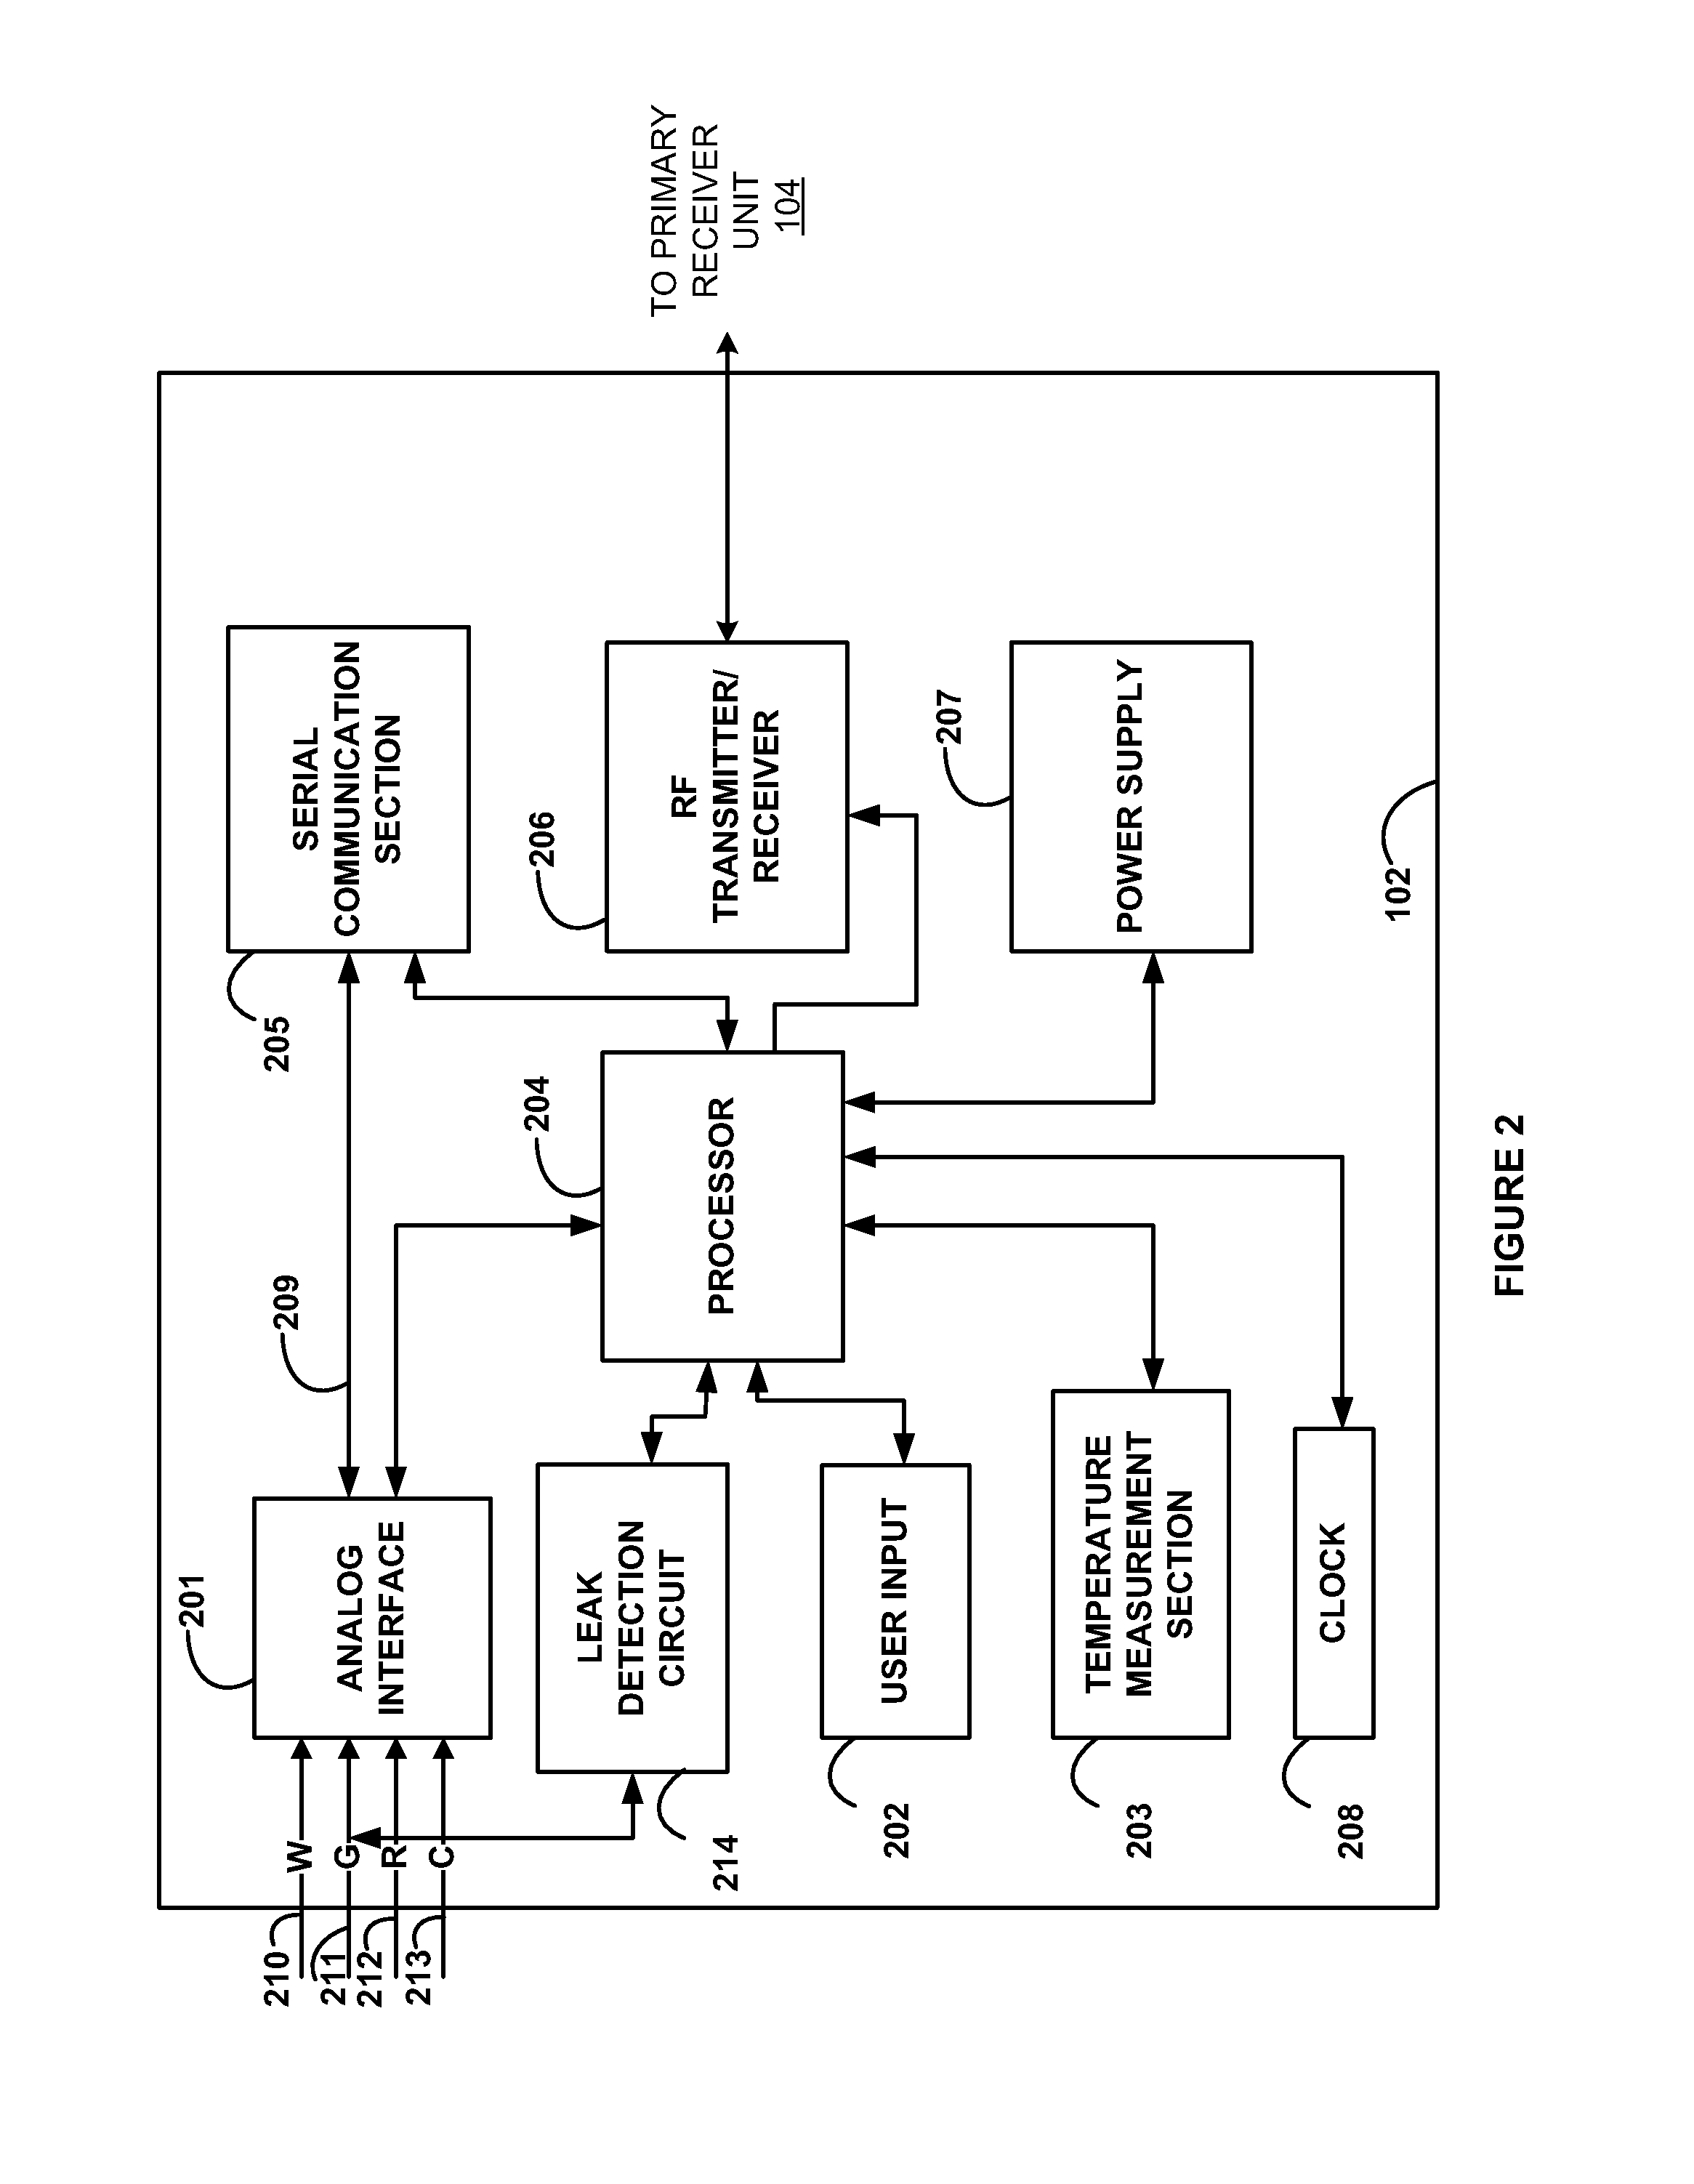 Analyte Signal Processing Device and Methods